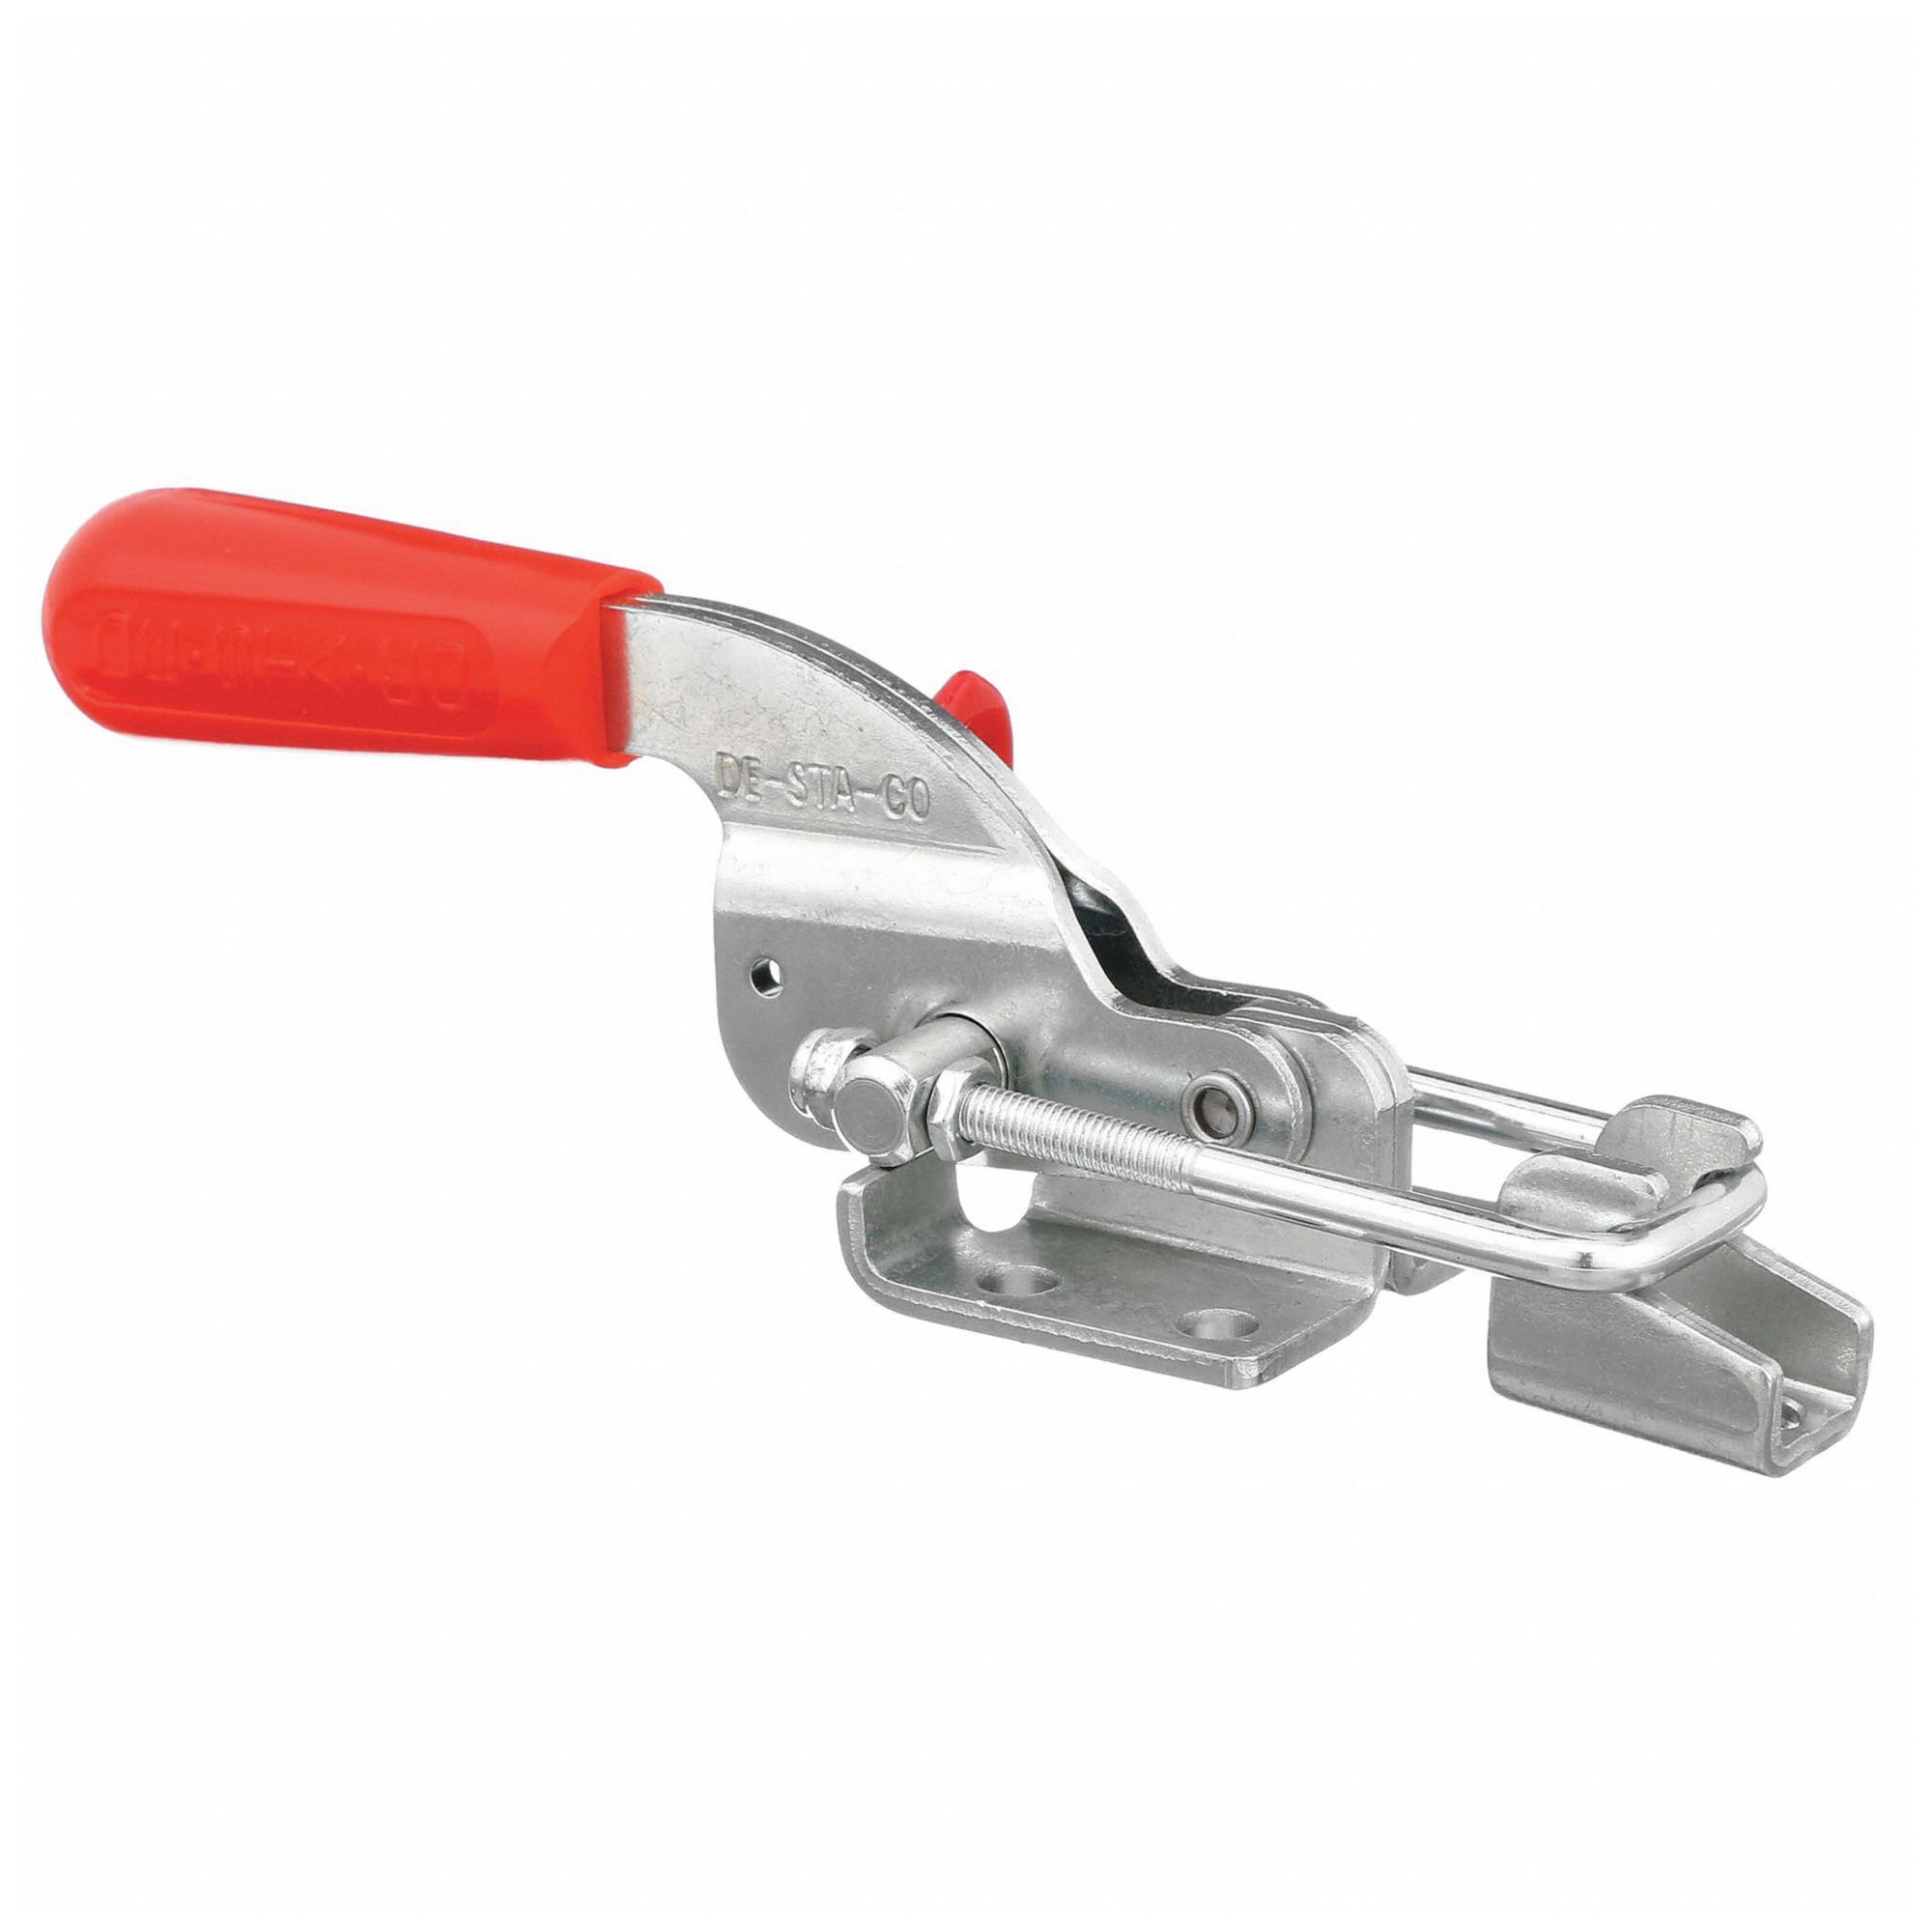 Horizontal Toggle Clamp for STEPCRAFT D-Series - Workpiece Clamping